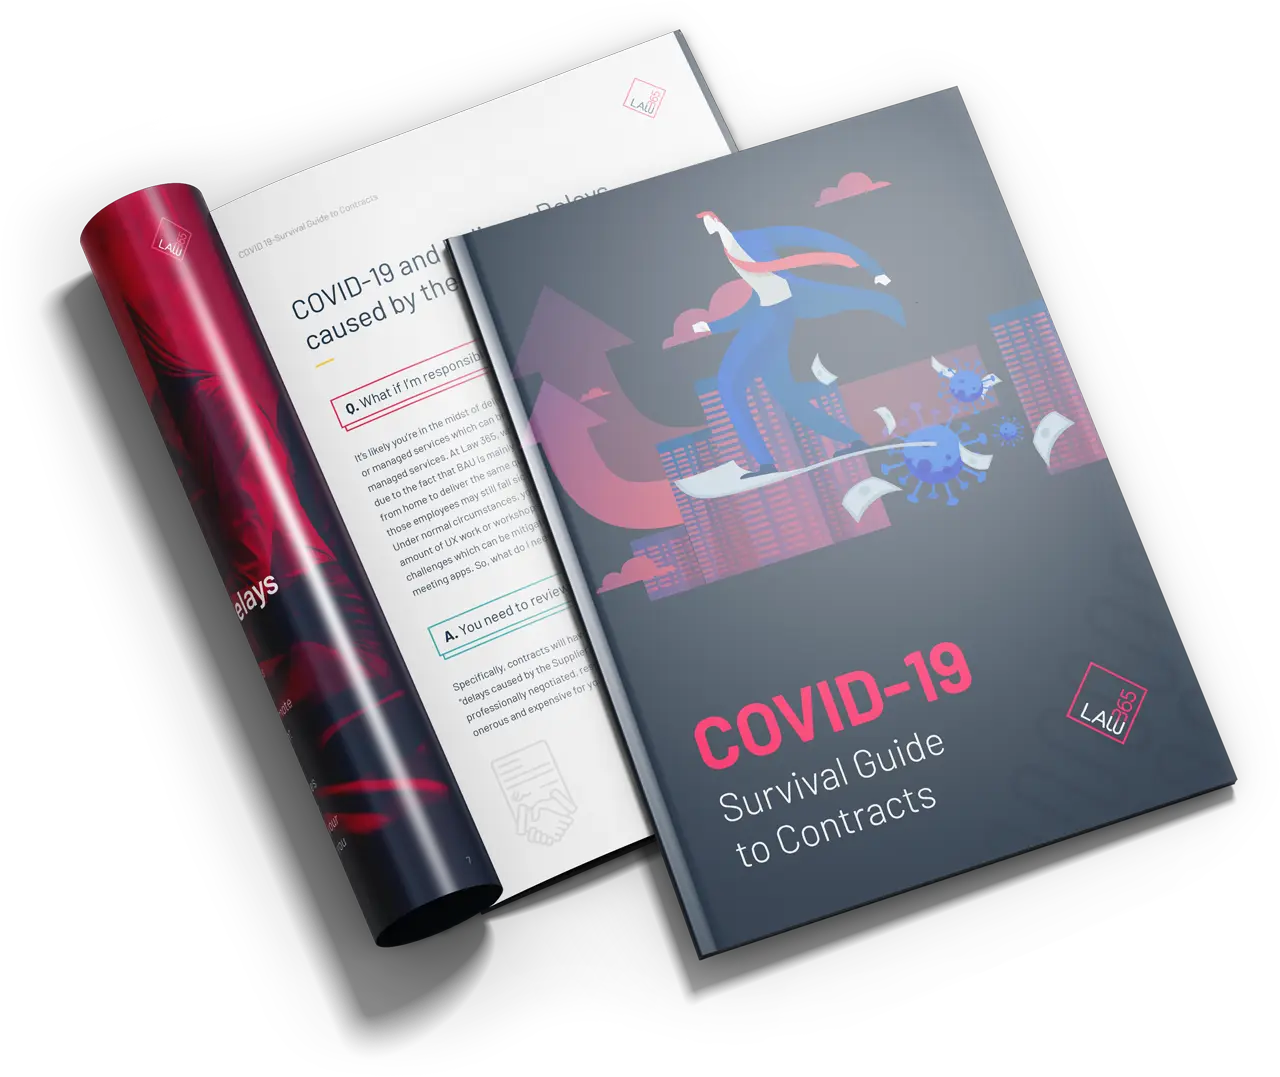 COVID-19 Survival Guide to Contracts